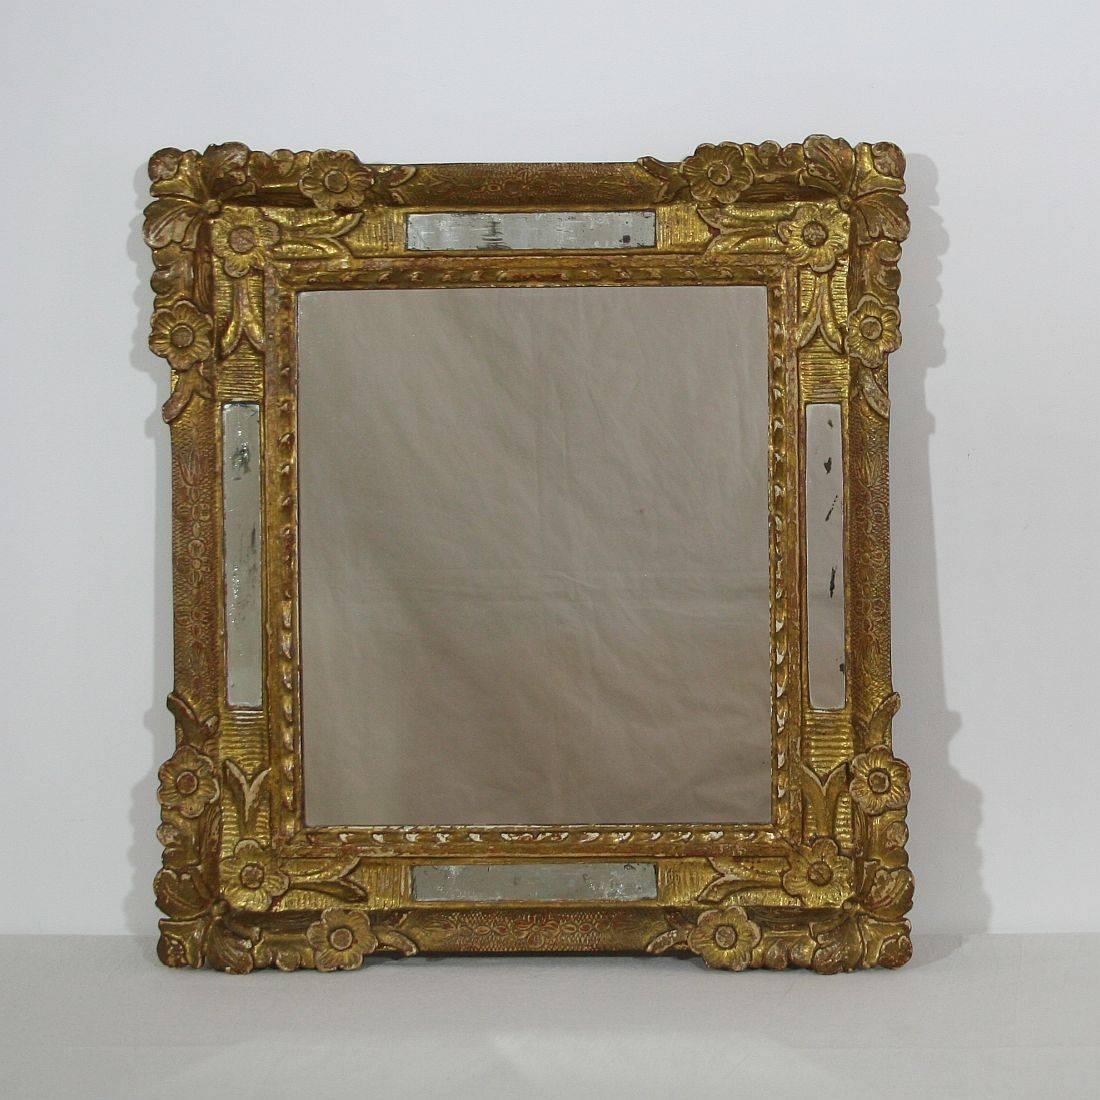 Beautiful 18th century gilded mirror. France circa 1700-1750, middle mirror-glass of later date. Weathered.